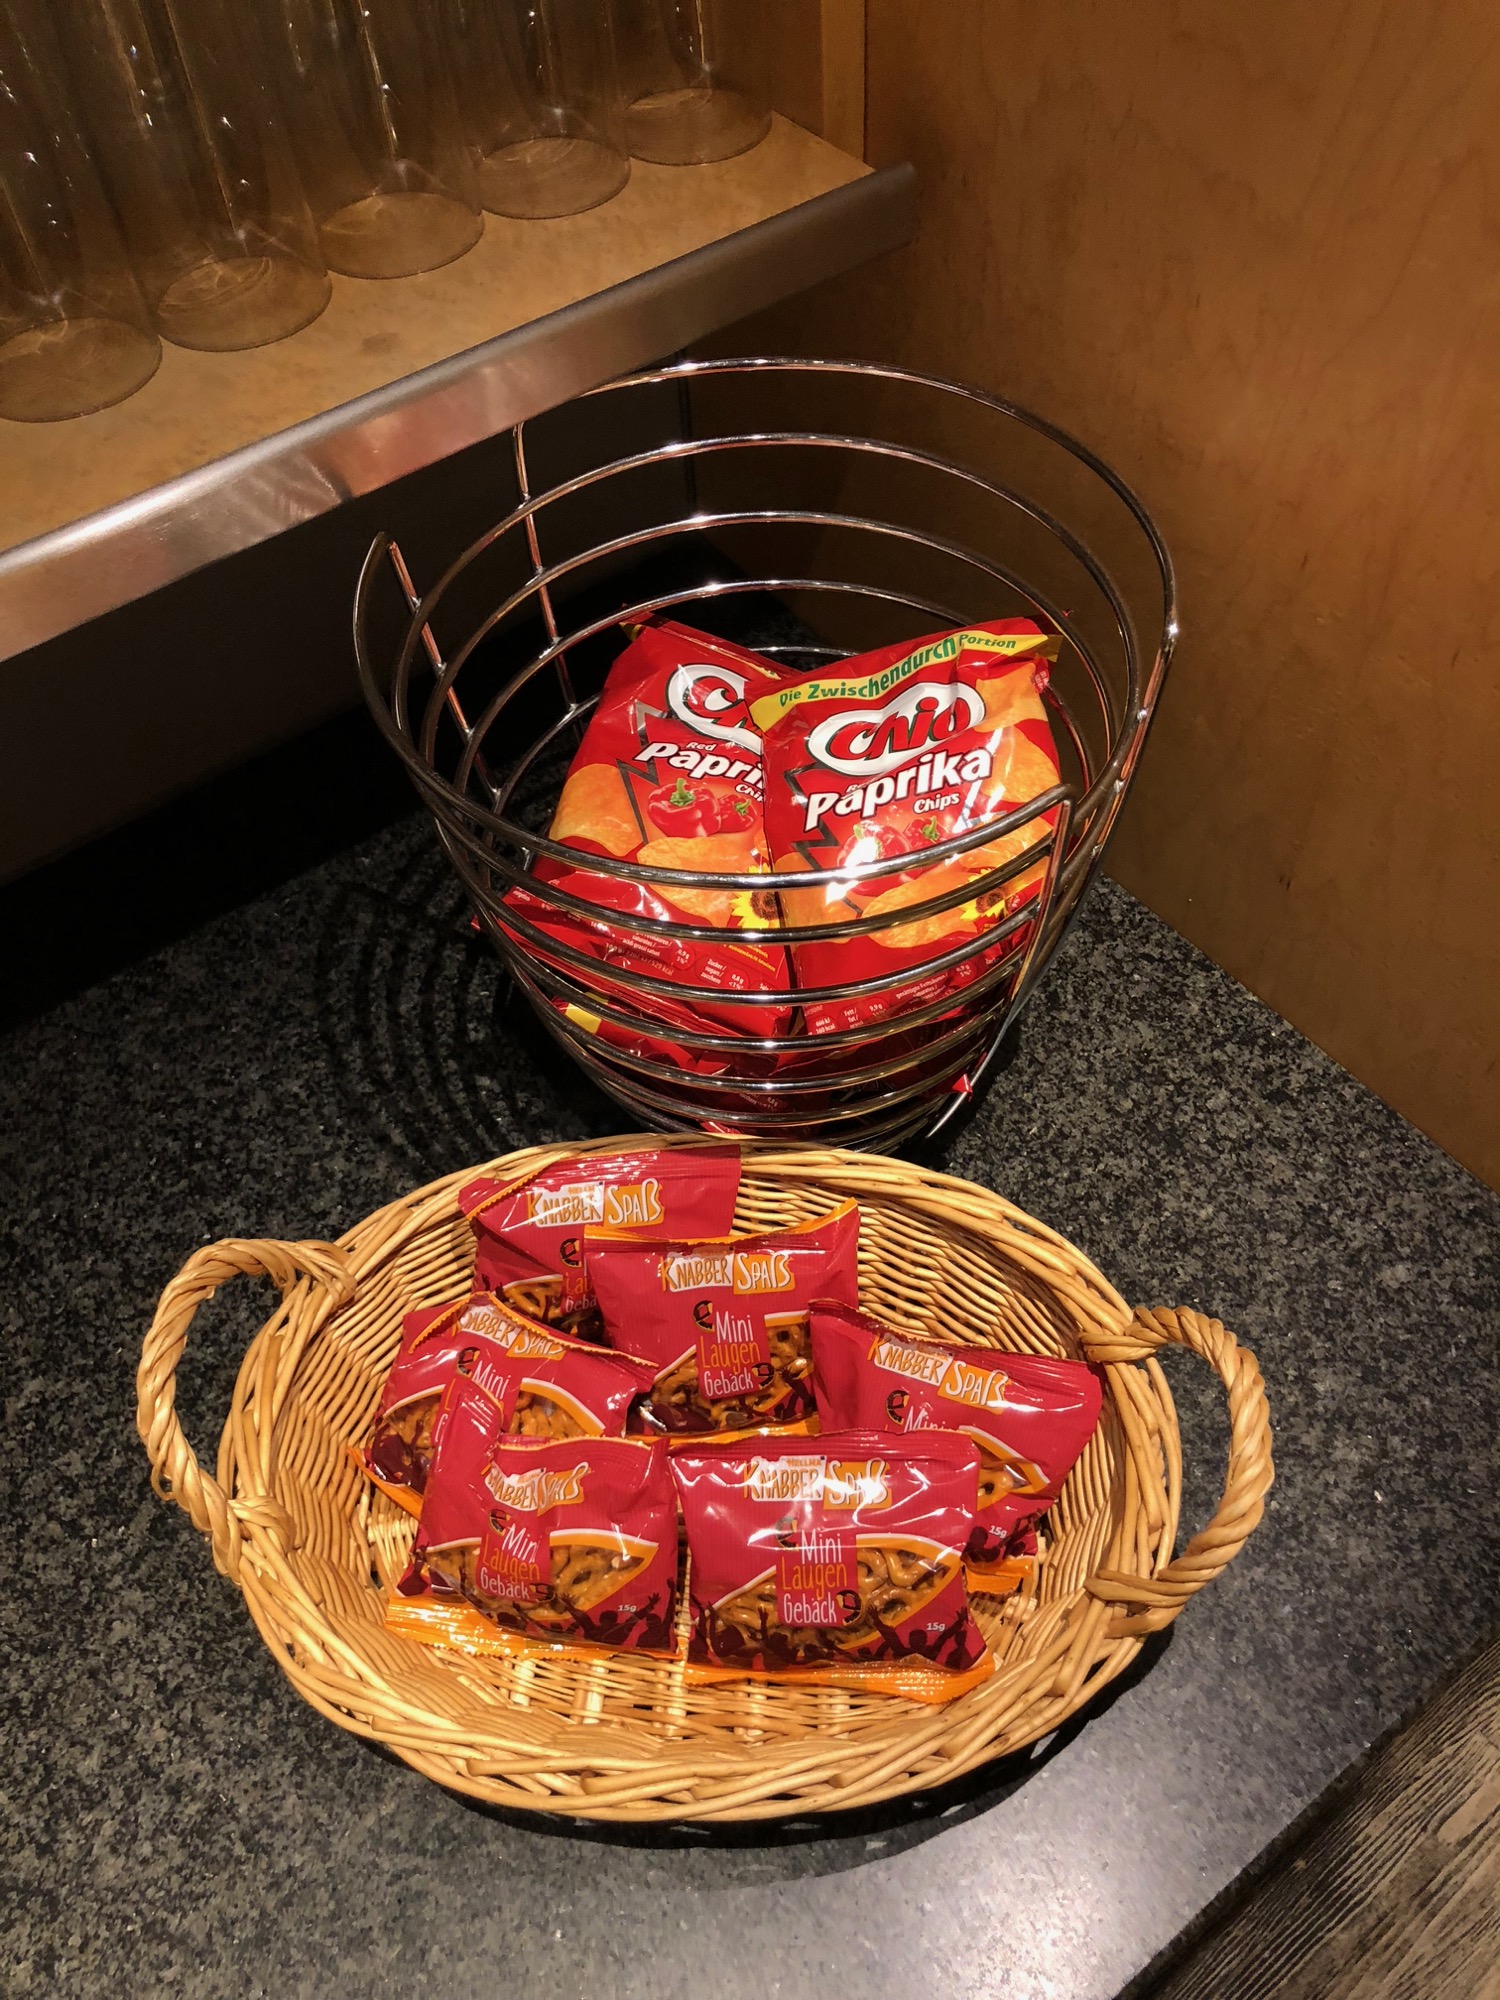 a basket of chips and a basket of chips